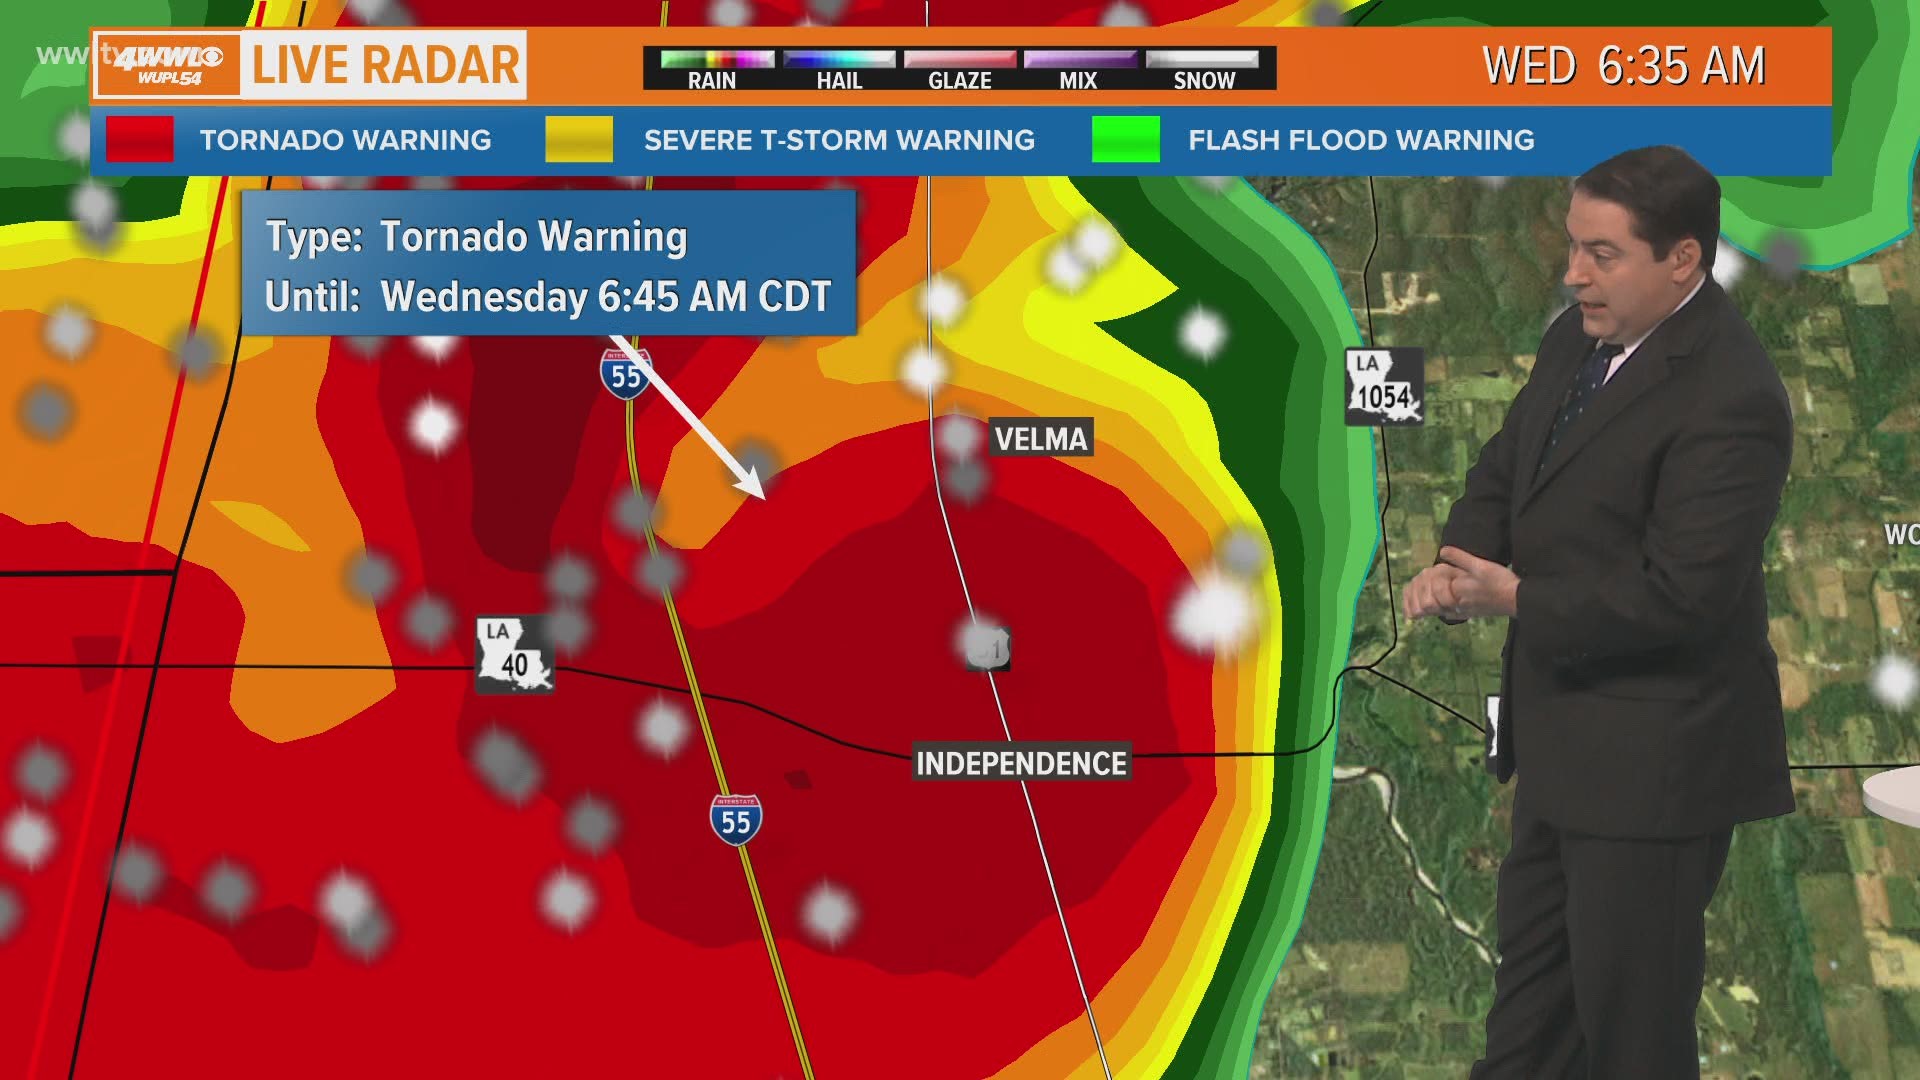 The warning has been issued for parts of Tangipahoa, St. Helena, Pike, Amite, Washington parishes until 6:45 a.m.